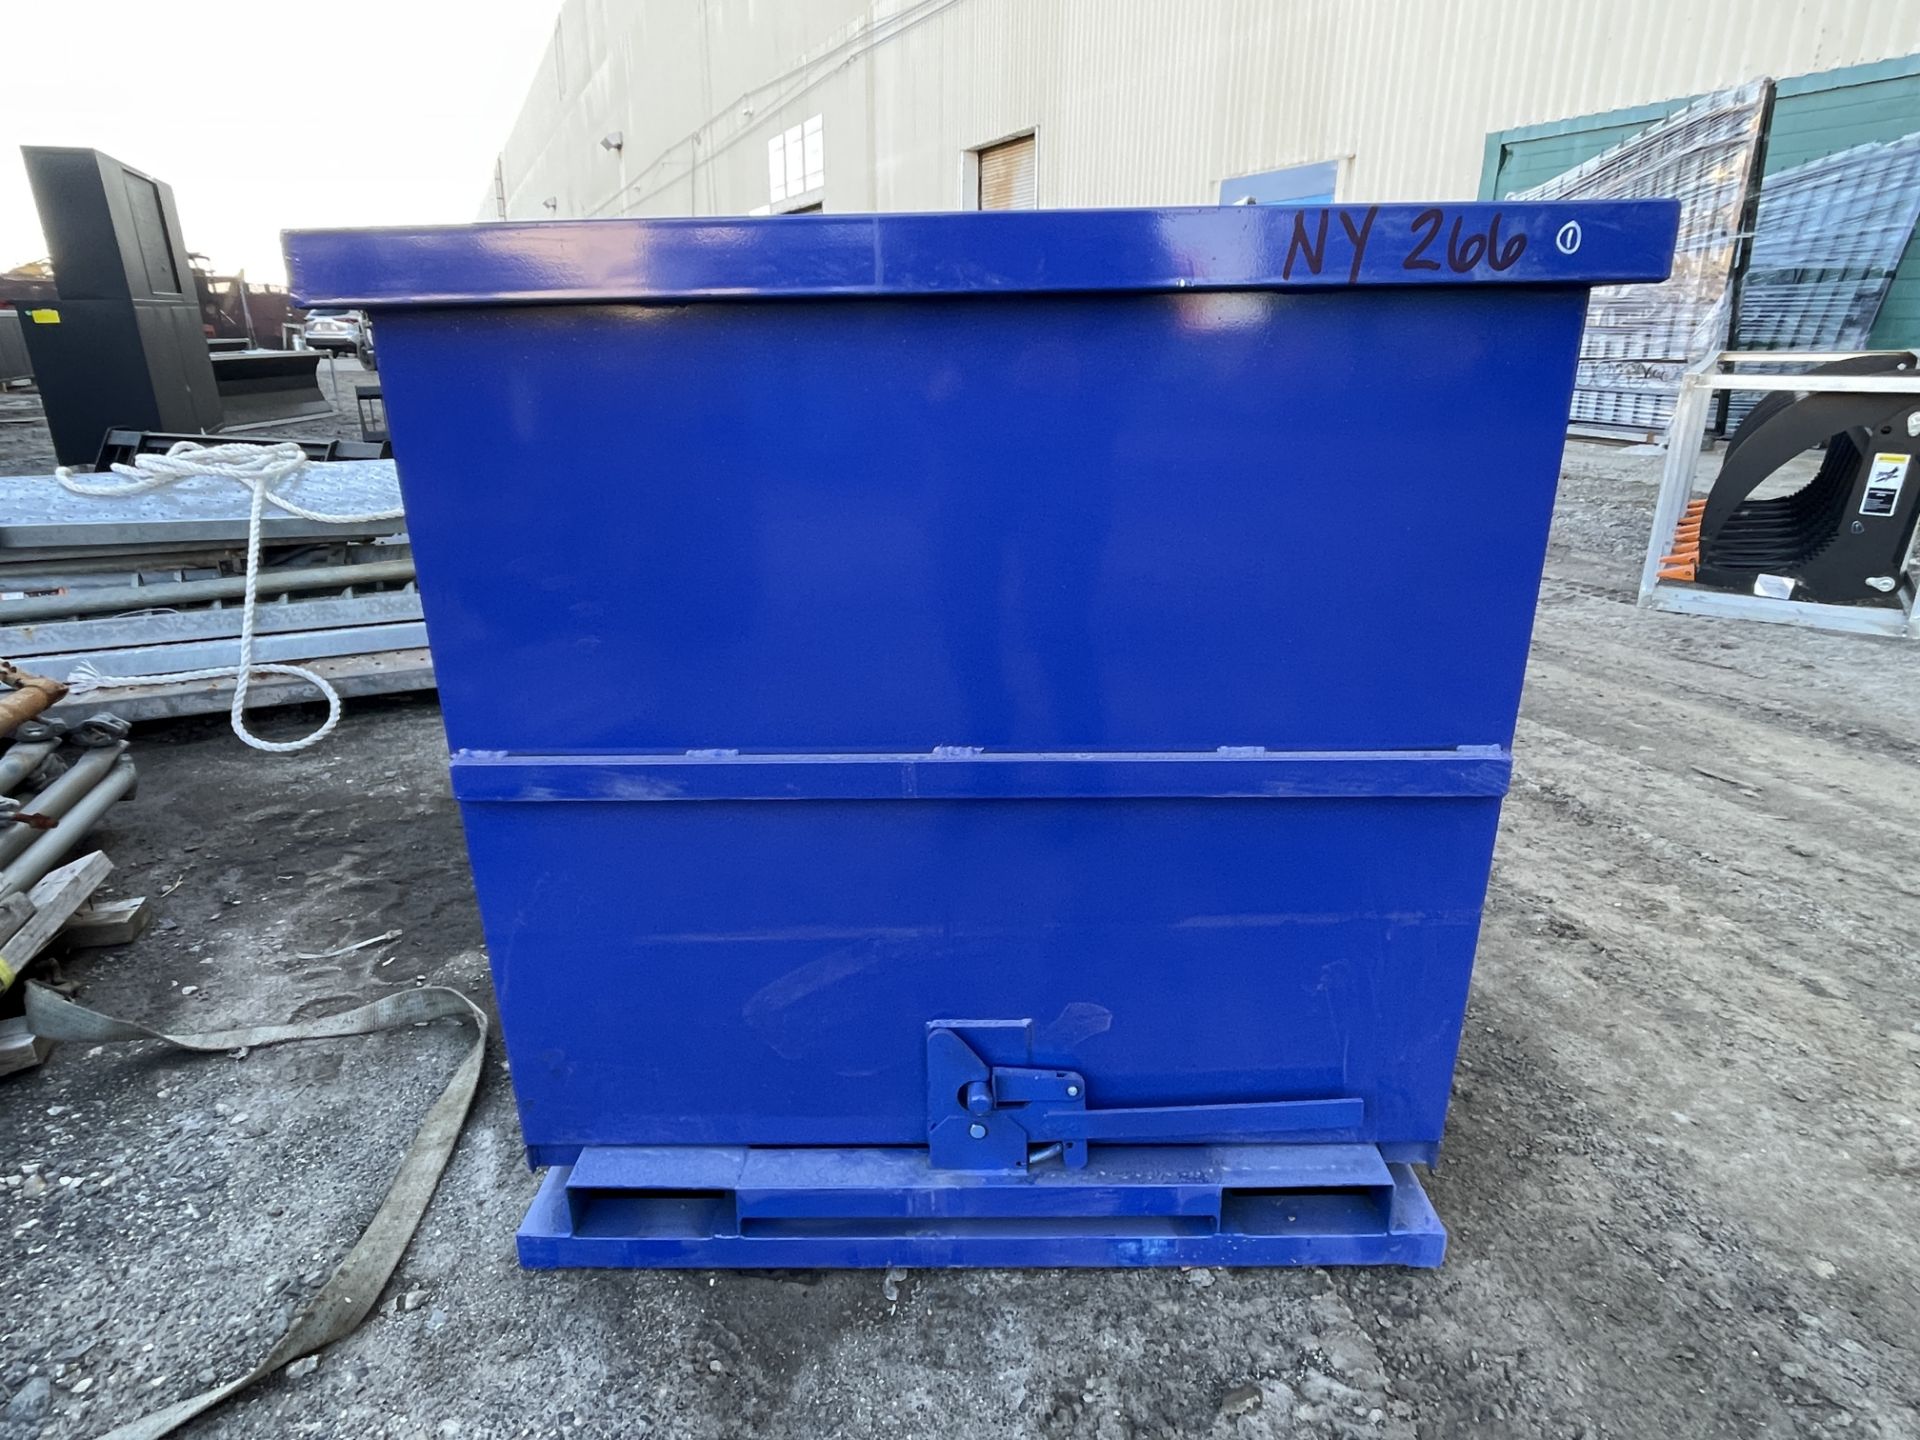 Brand New 1 Cubic Yard Self Dumping Hopper (NY266) - Image 5 of 6